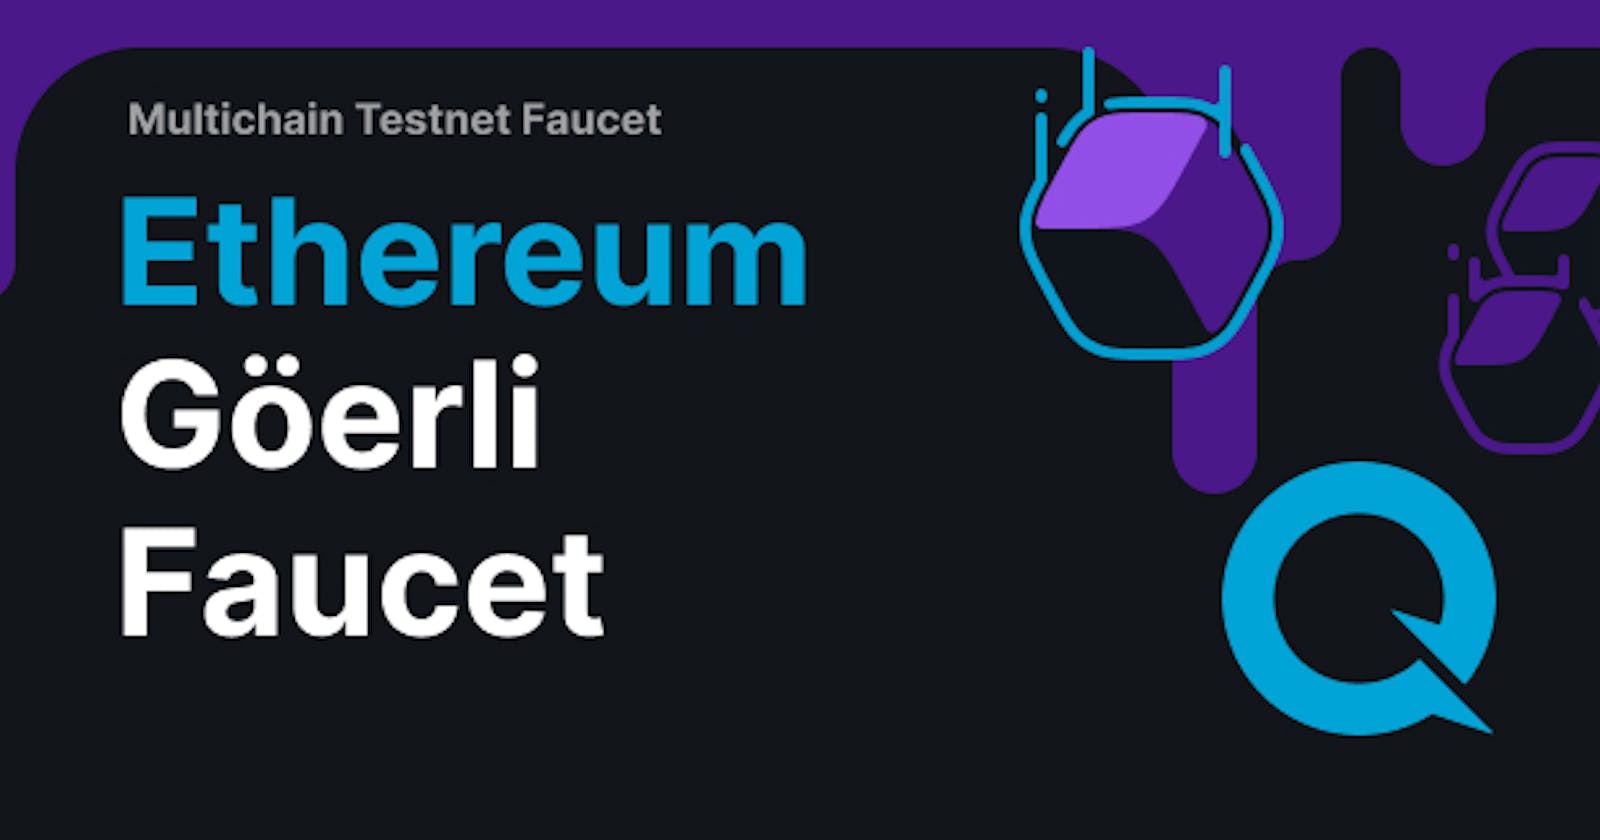 Top FAUCET Ethereum GOERLI - The Ultimate Guide!